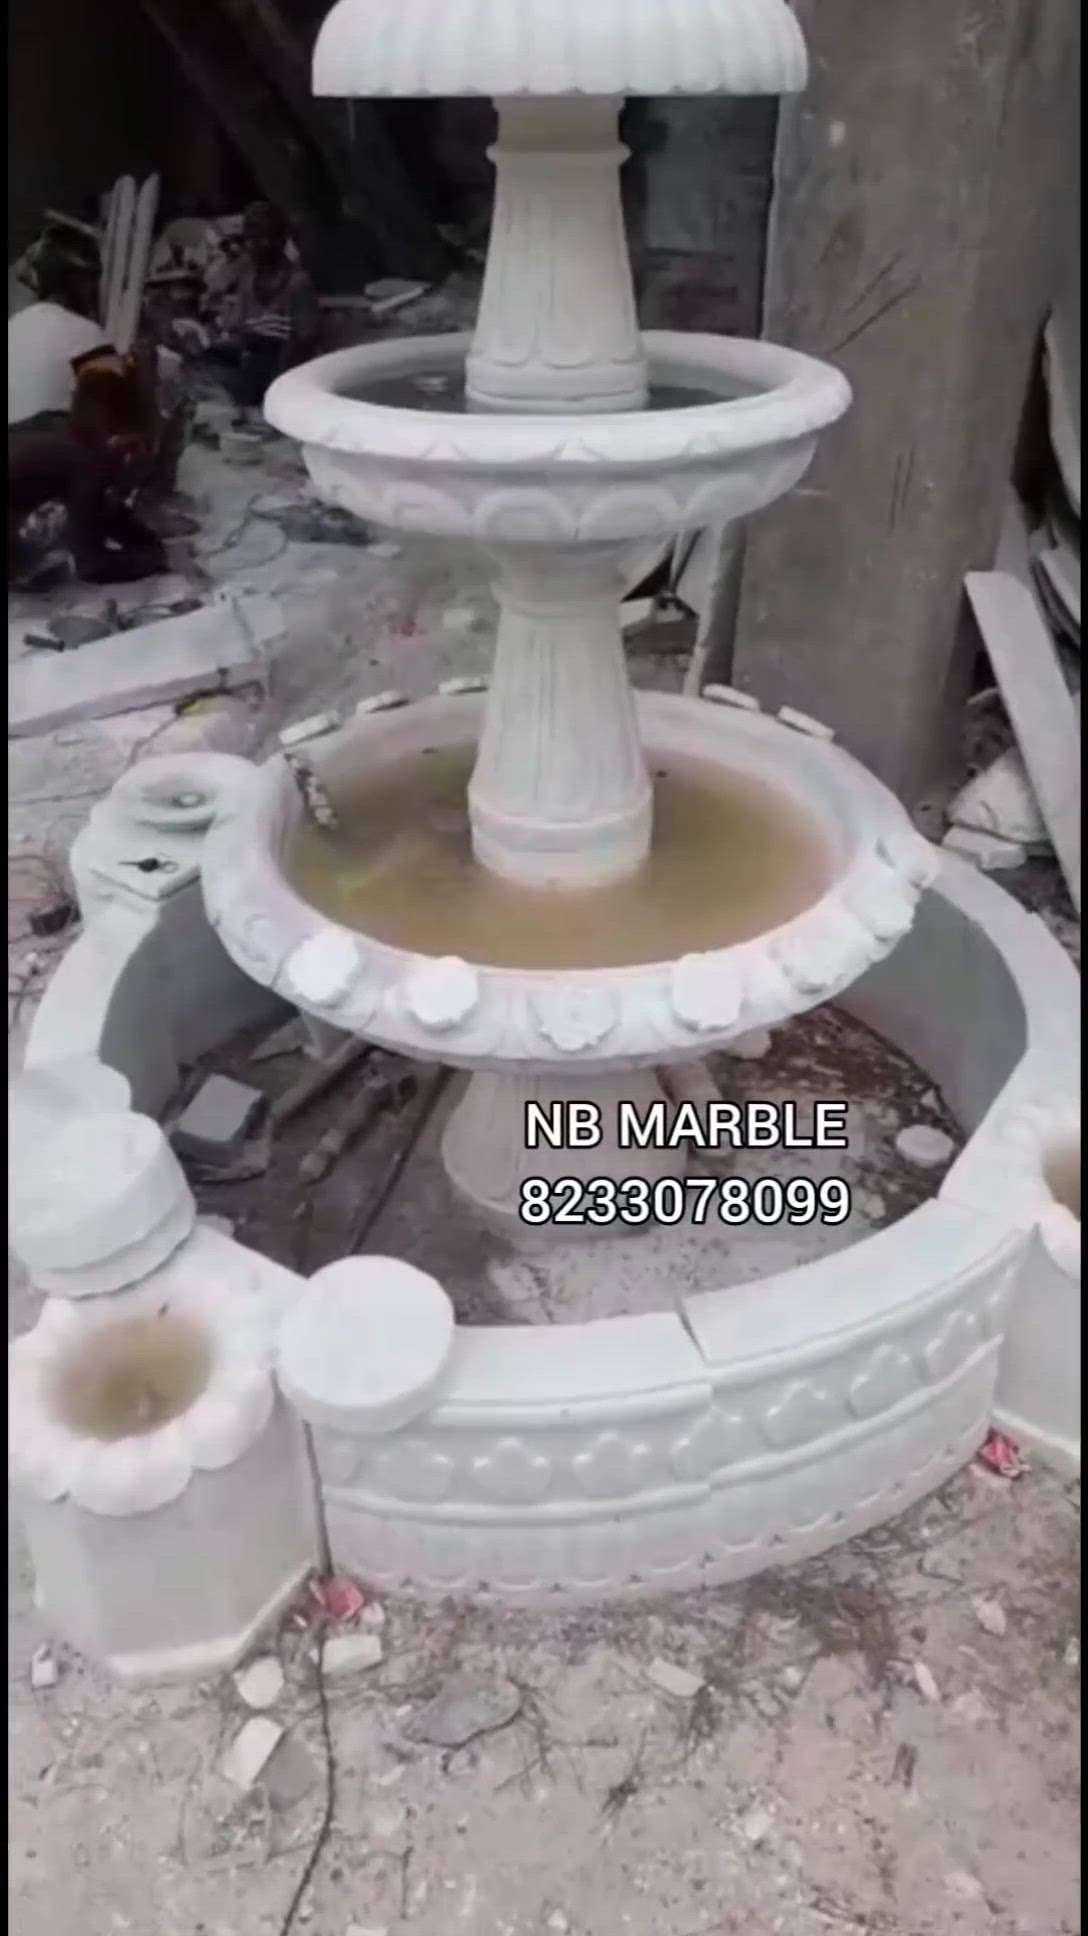 White Marble Carving Fountain With Pond

Decor your garden with beautiful fountain

We make manufacturer of marble and sandstone fountain 

We make any design according to your requirement and size

Follow me @nbmarble 

More information contact me
082330 78099 

#fountain #whitemarble #nbmarble #gardendecor #gardenfountain #marblework #marblefountain #landscape #waterfountain #waterfalls